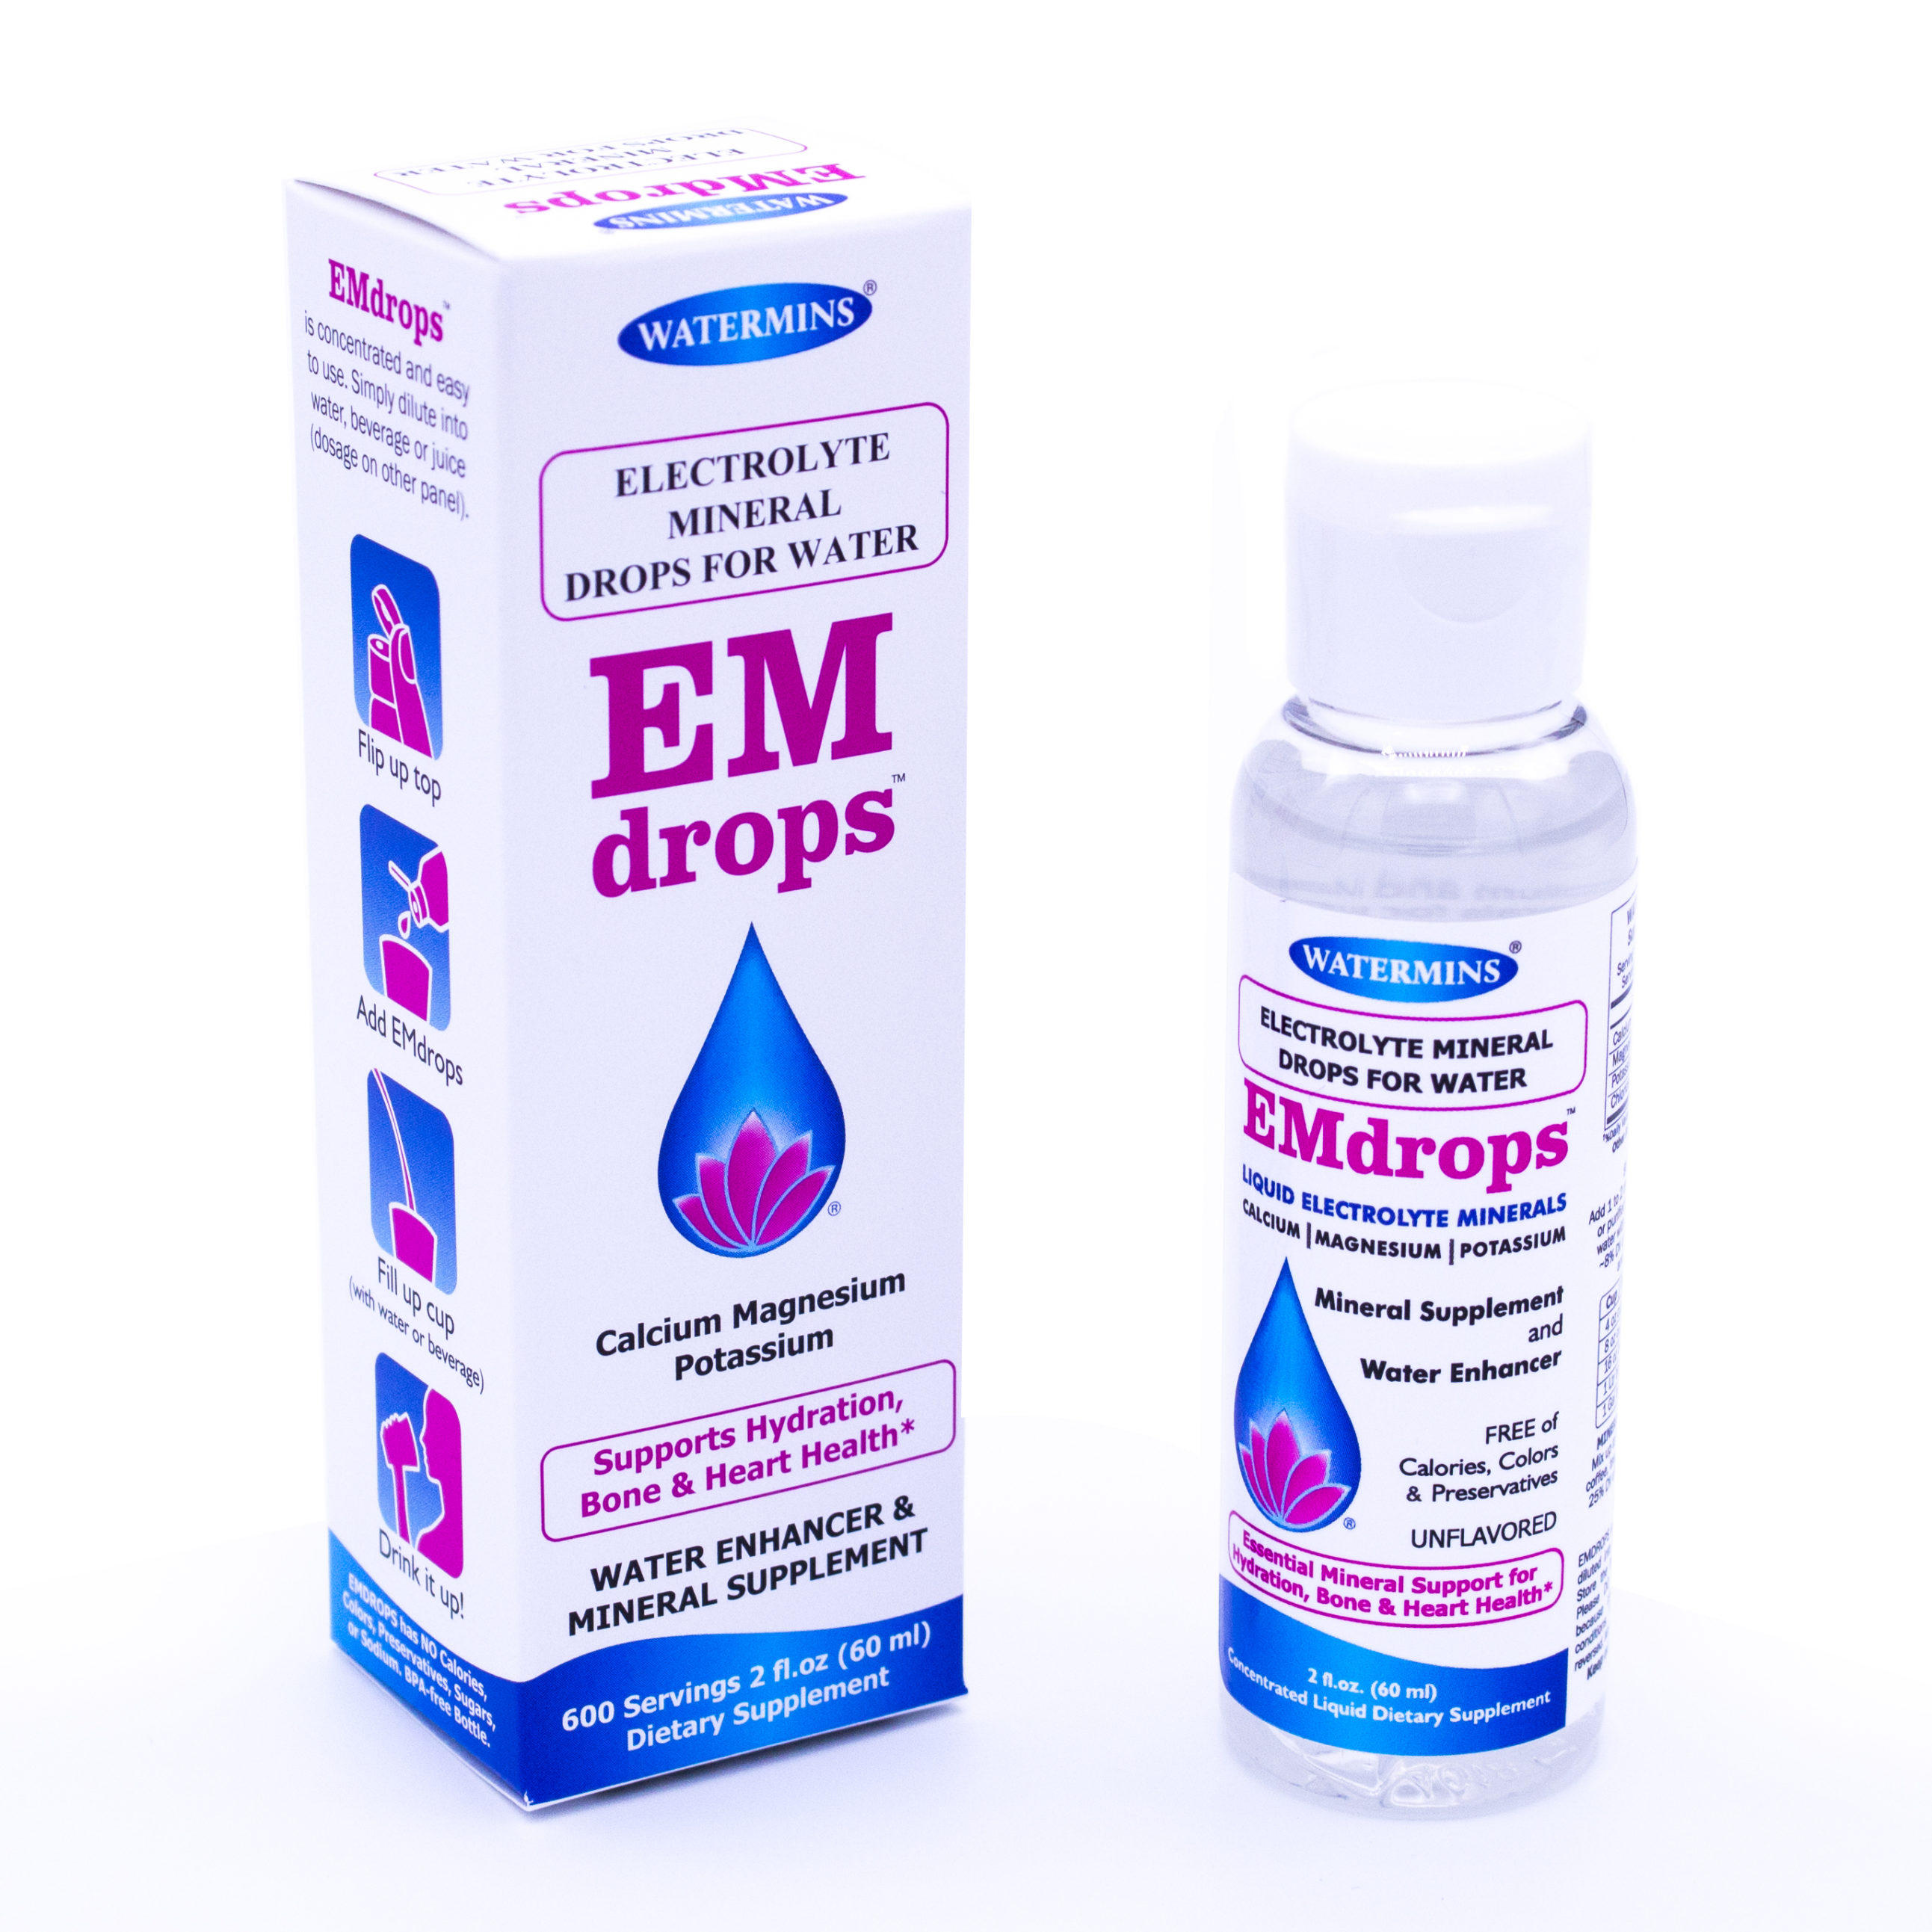 EMDROPS by Watermins - Electrolyte Mineral Drops - Product Image - Bottle and Carton Front View